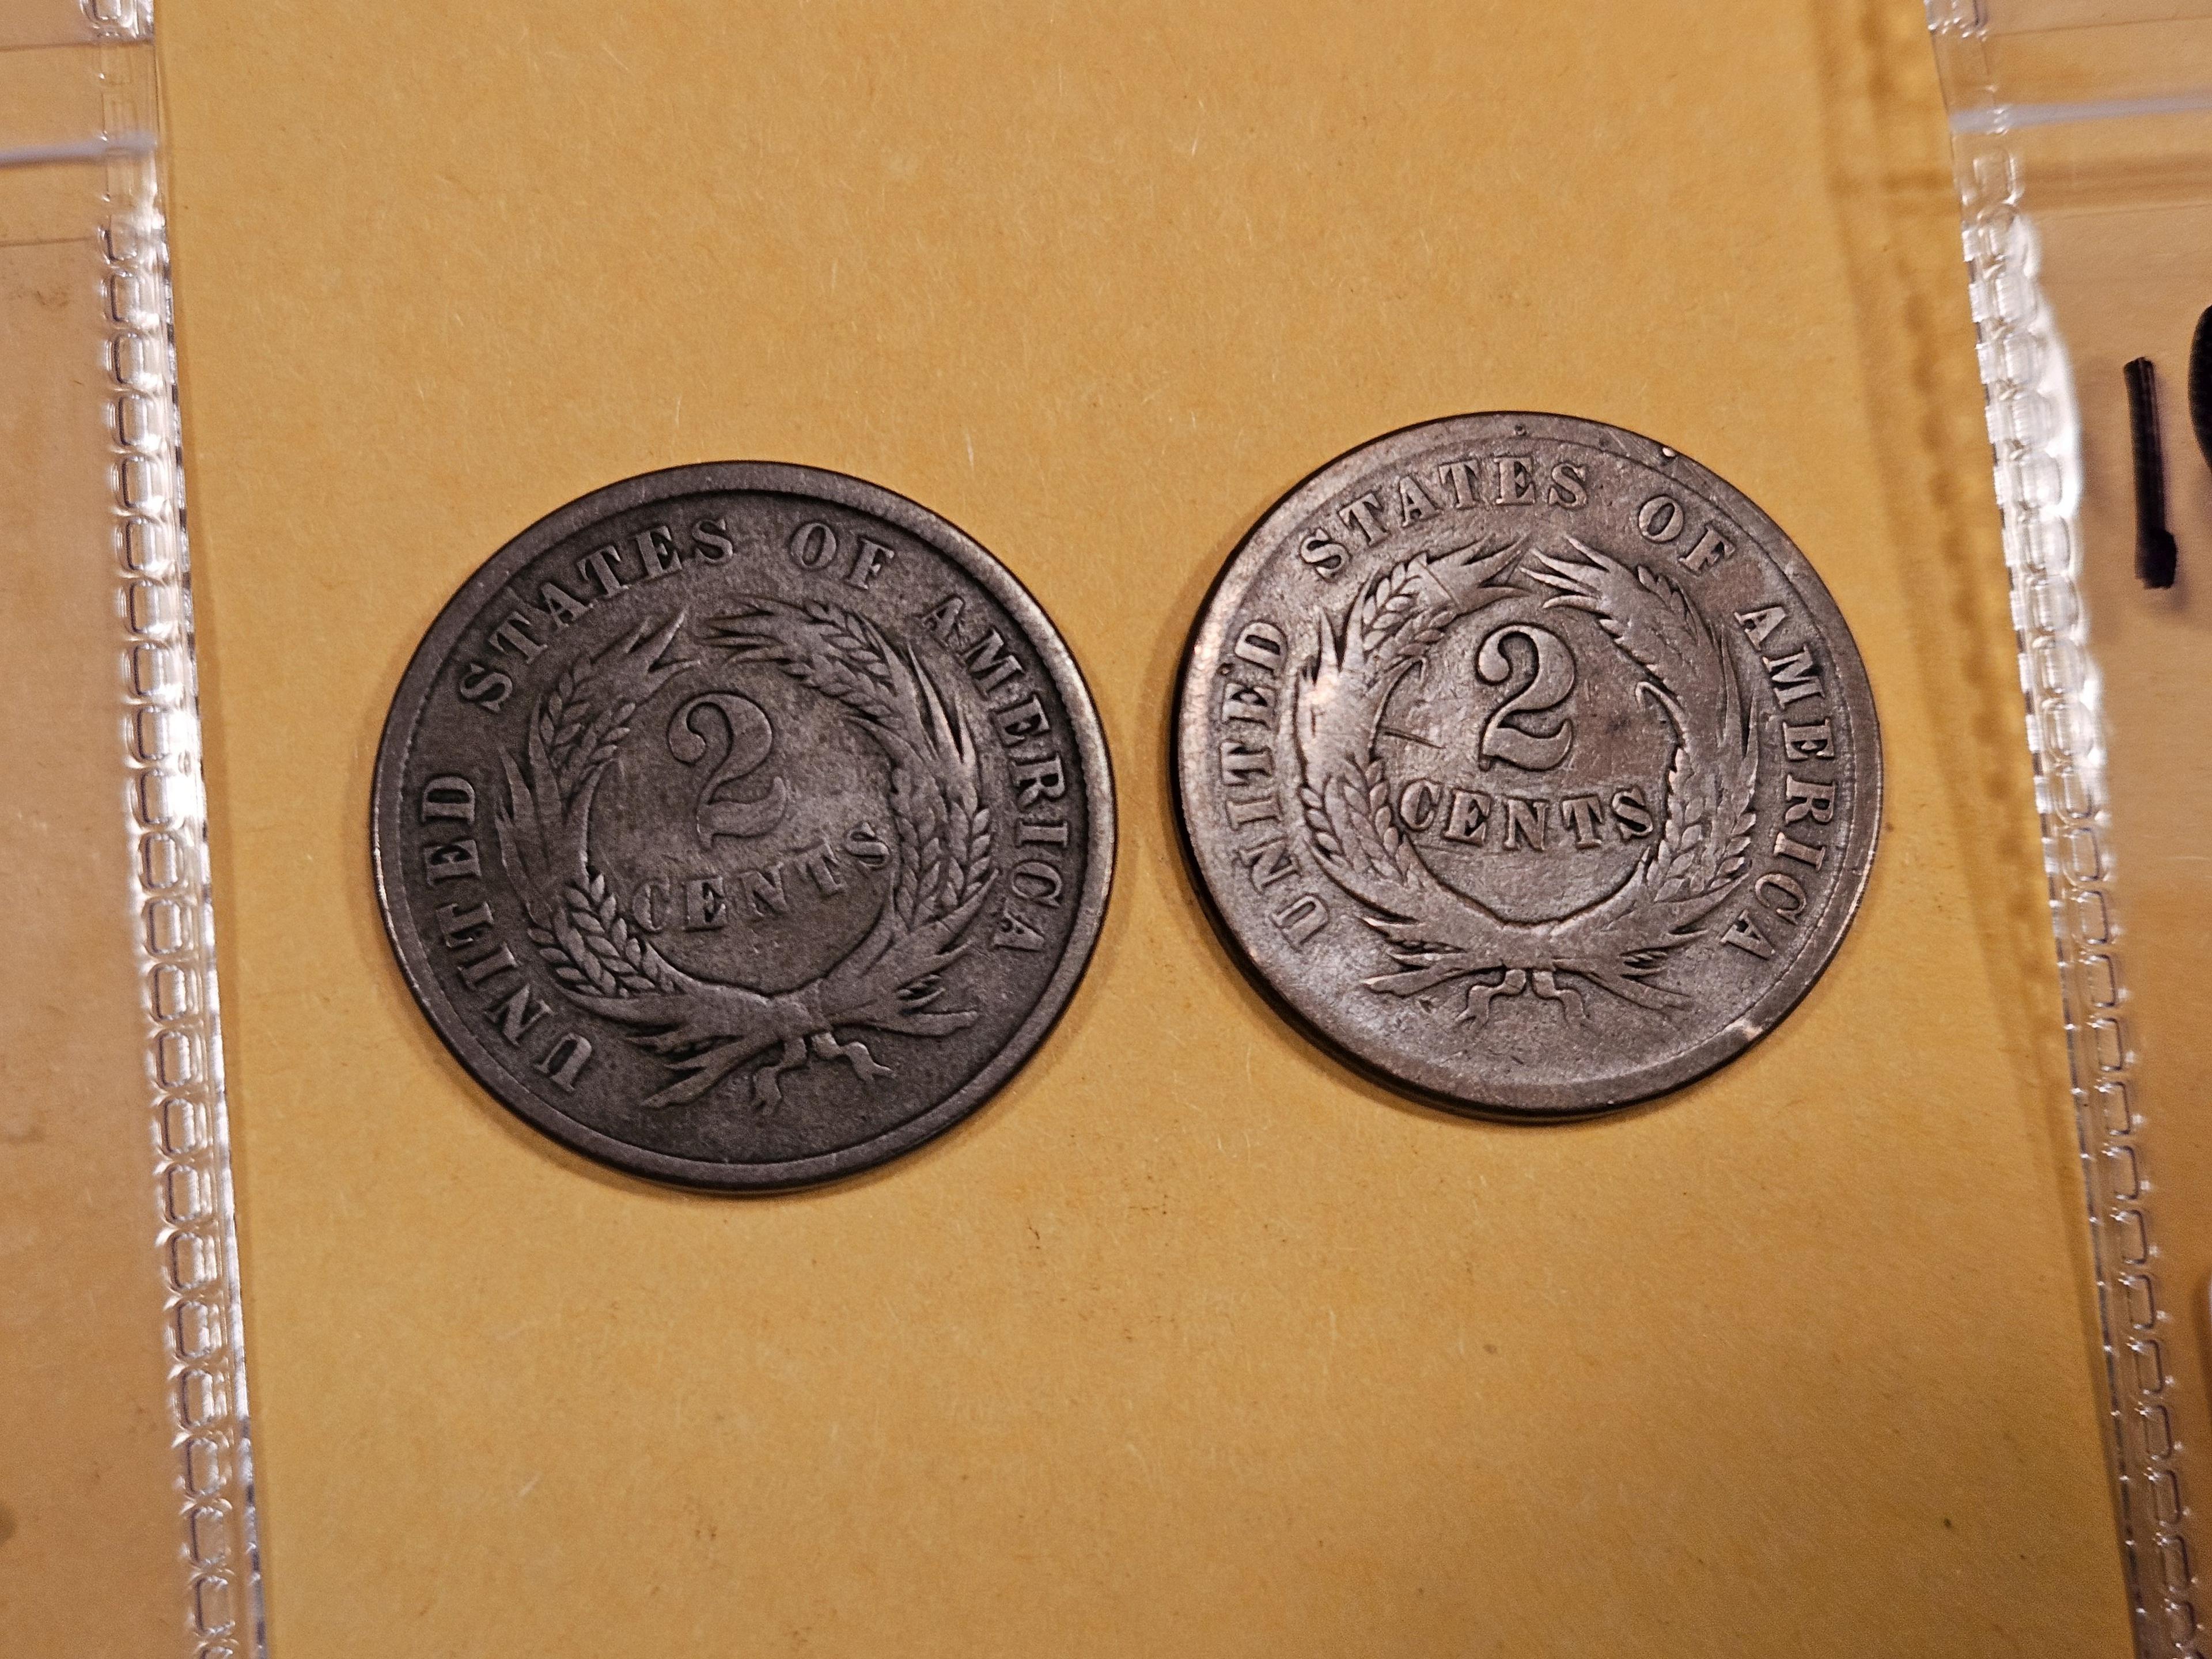 1864 and 1865 two Cent pieces